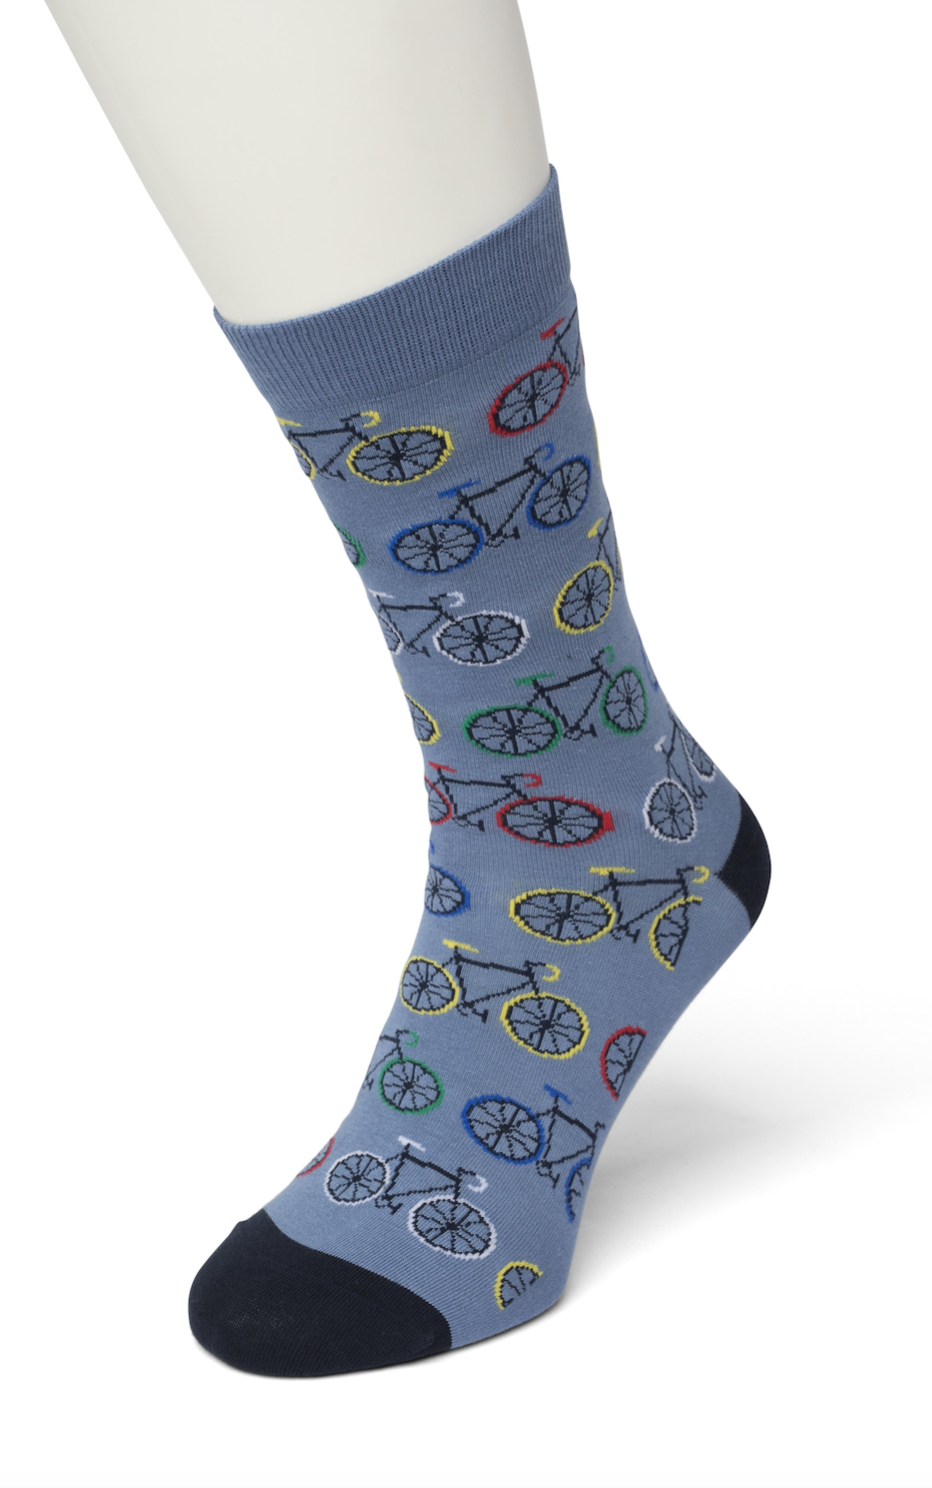 Bonnie Doon BT9921.03 Biker Sock - Denim blue cotton mix ankle socks with light grey road bike pattern with red, blue, black and yellow wheels, seat and handle bars, light grey toe and heel. Available in men and women sizes.